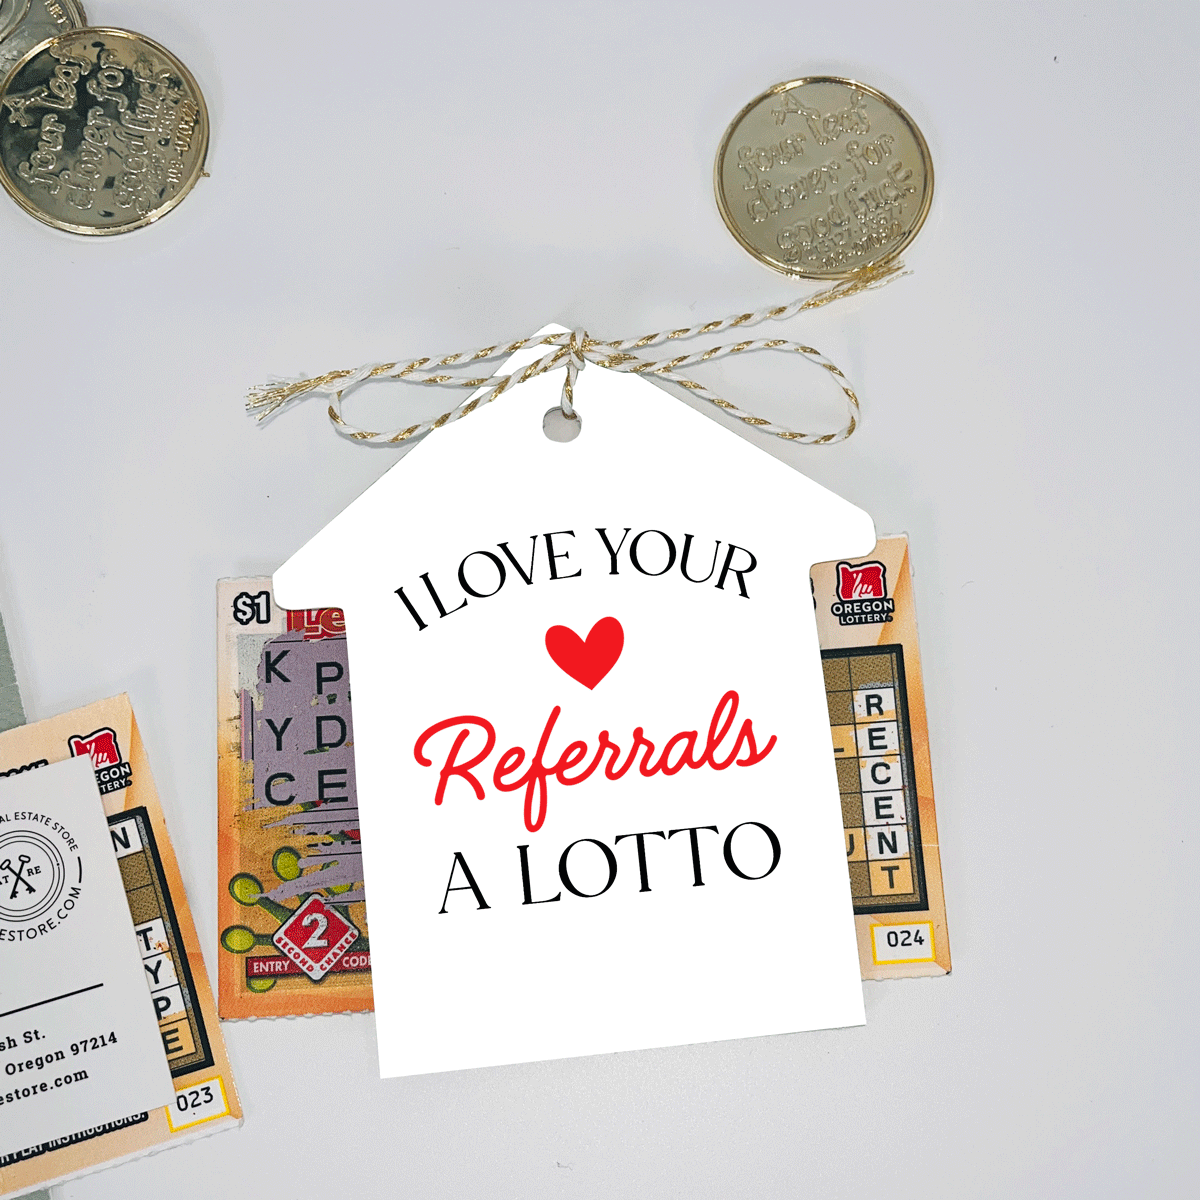 Lottery Ticket Holder - I love your Referrals a Lotto